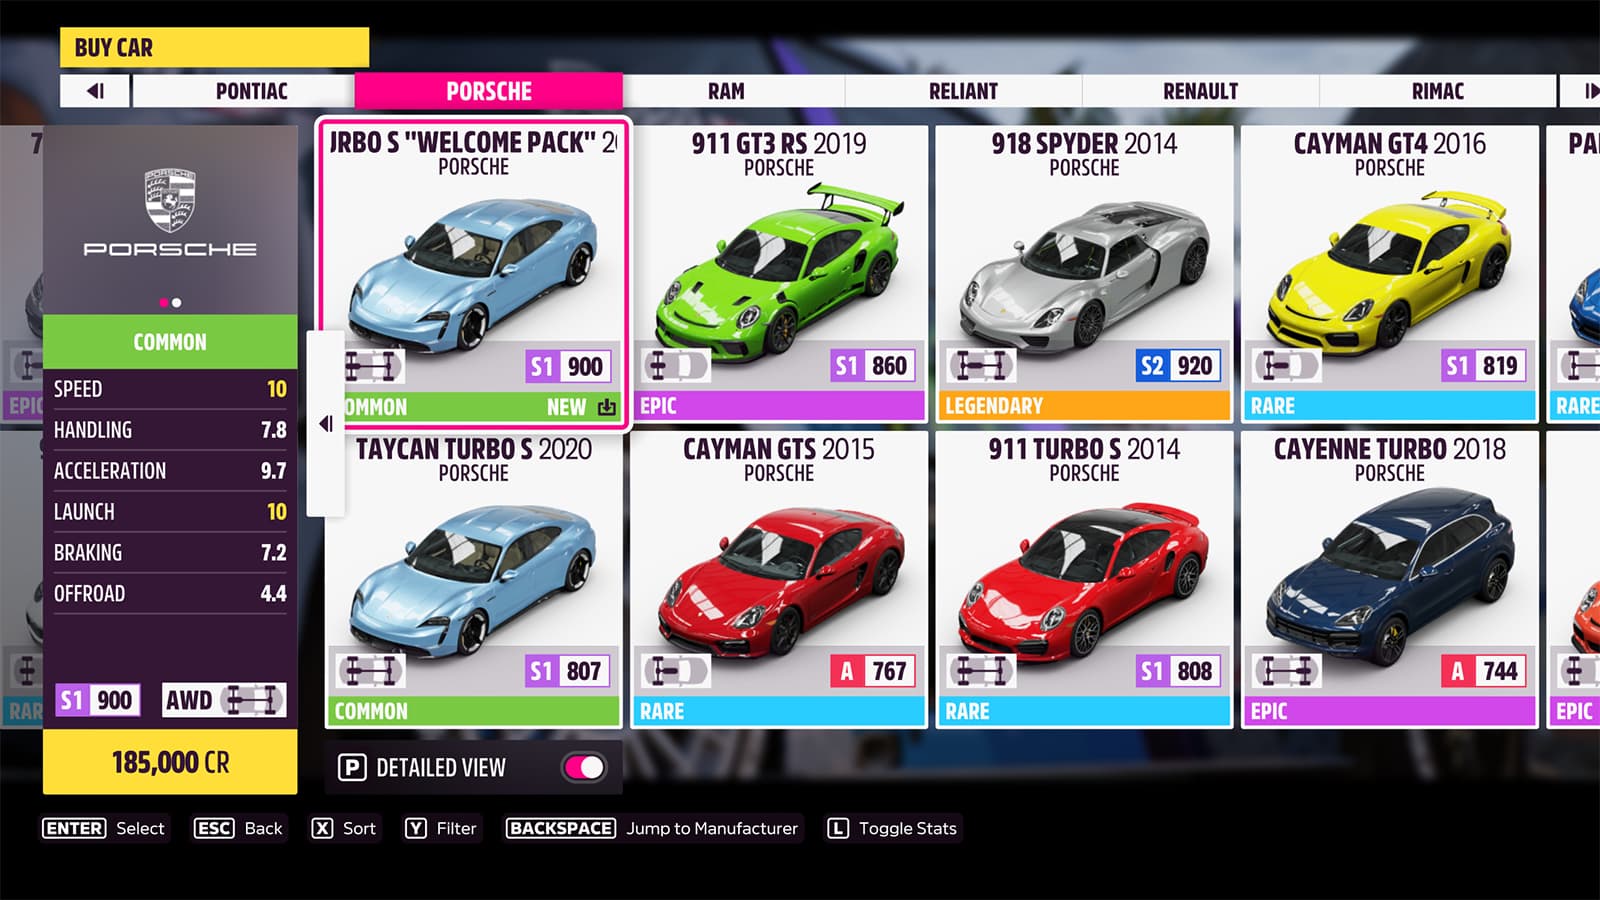 A screenshot of the Porsche Taycan Turbo S 2020 in the store